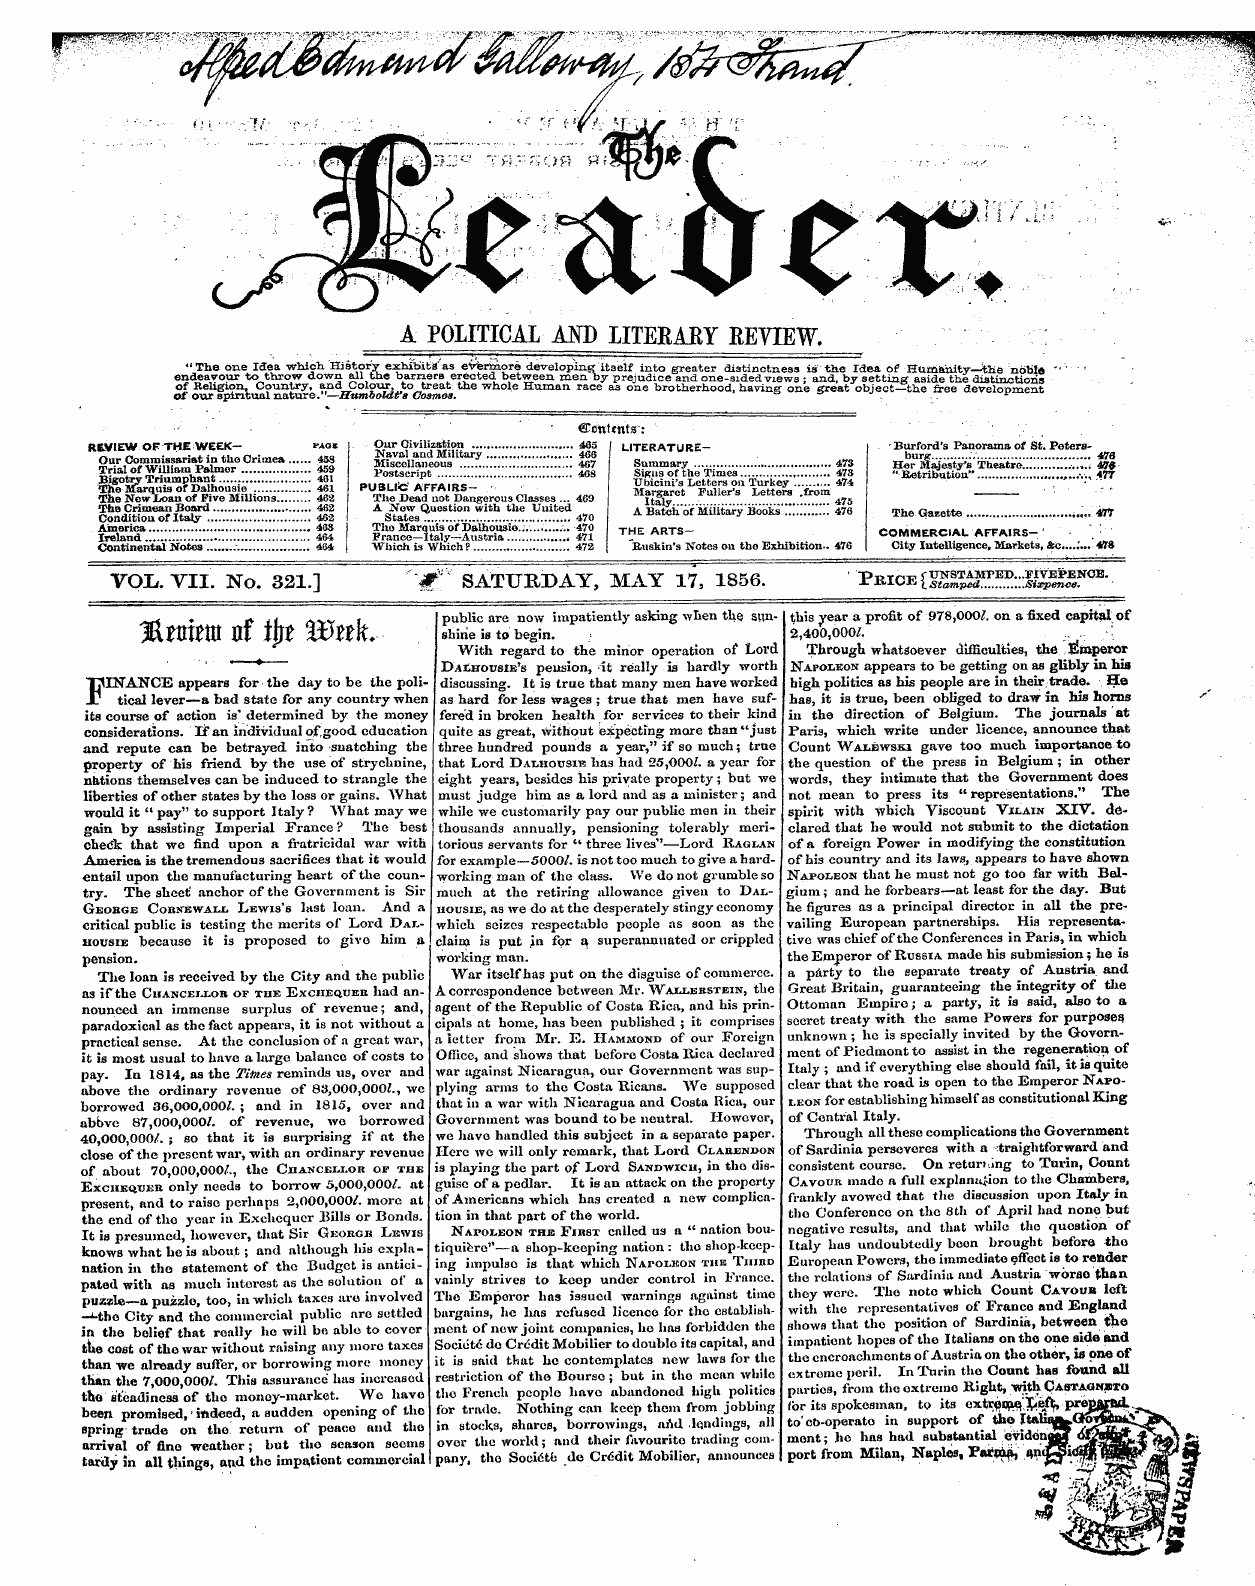 Leader (1850-1860): jS F Y, 1st edition - ¦-•' ¦ ¦ ¦- •¦ 0 I . • ¦ • ¦ .-/?/ ' • -?':&Gt;. ¦" .:¦ ¦ • " ¦ '" ? " ?'F {¦ '¥?¦; Zj:\F ' - ' ¦ ¦ ' ' ¦ H T ': " ' ' ¦¦ - - ^ F Vsr^' ^* ' V%^ "^^ ^^ -*M *V+-A Political And Literary Review,